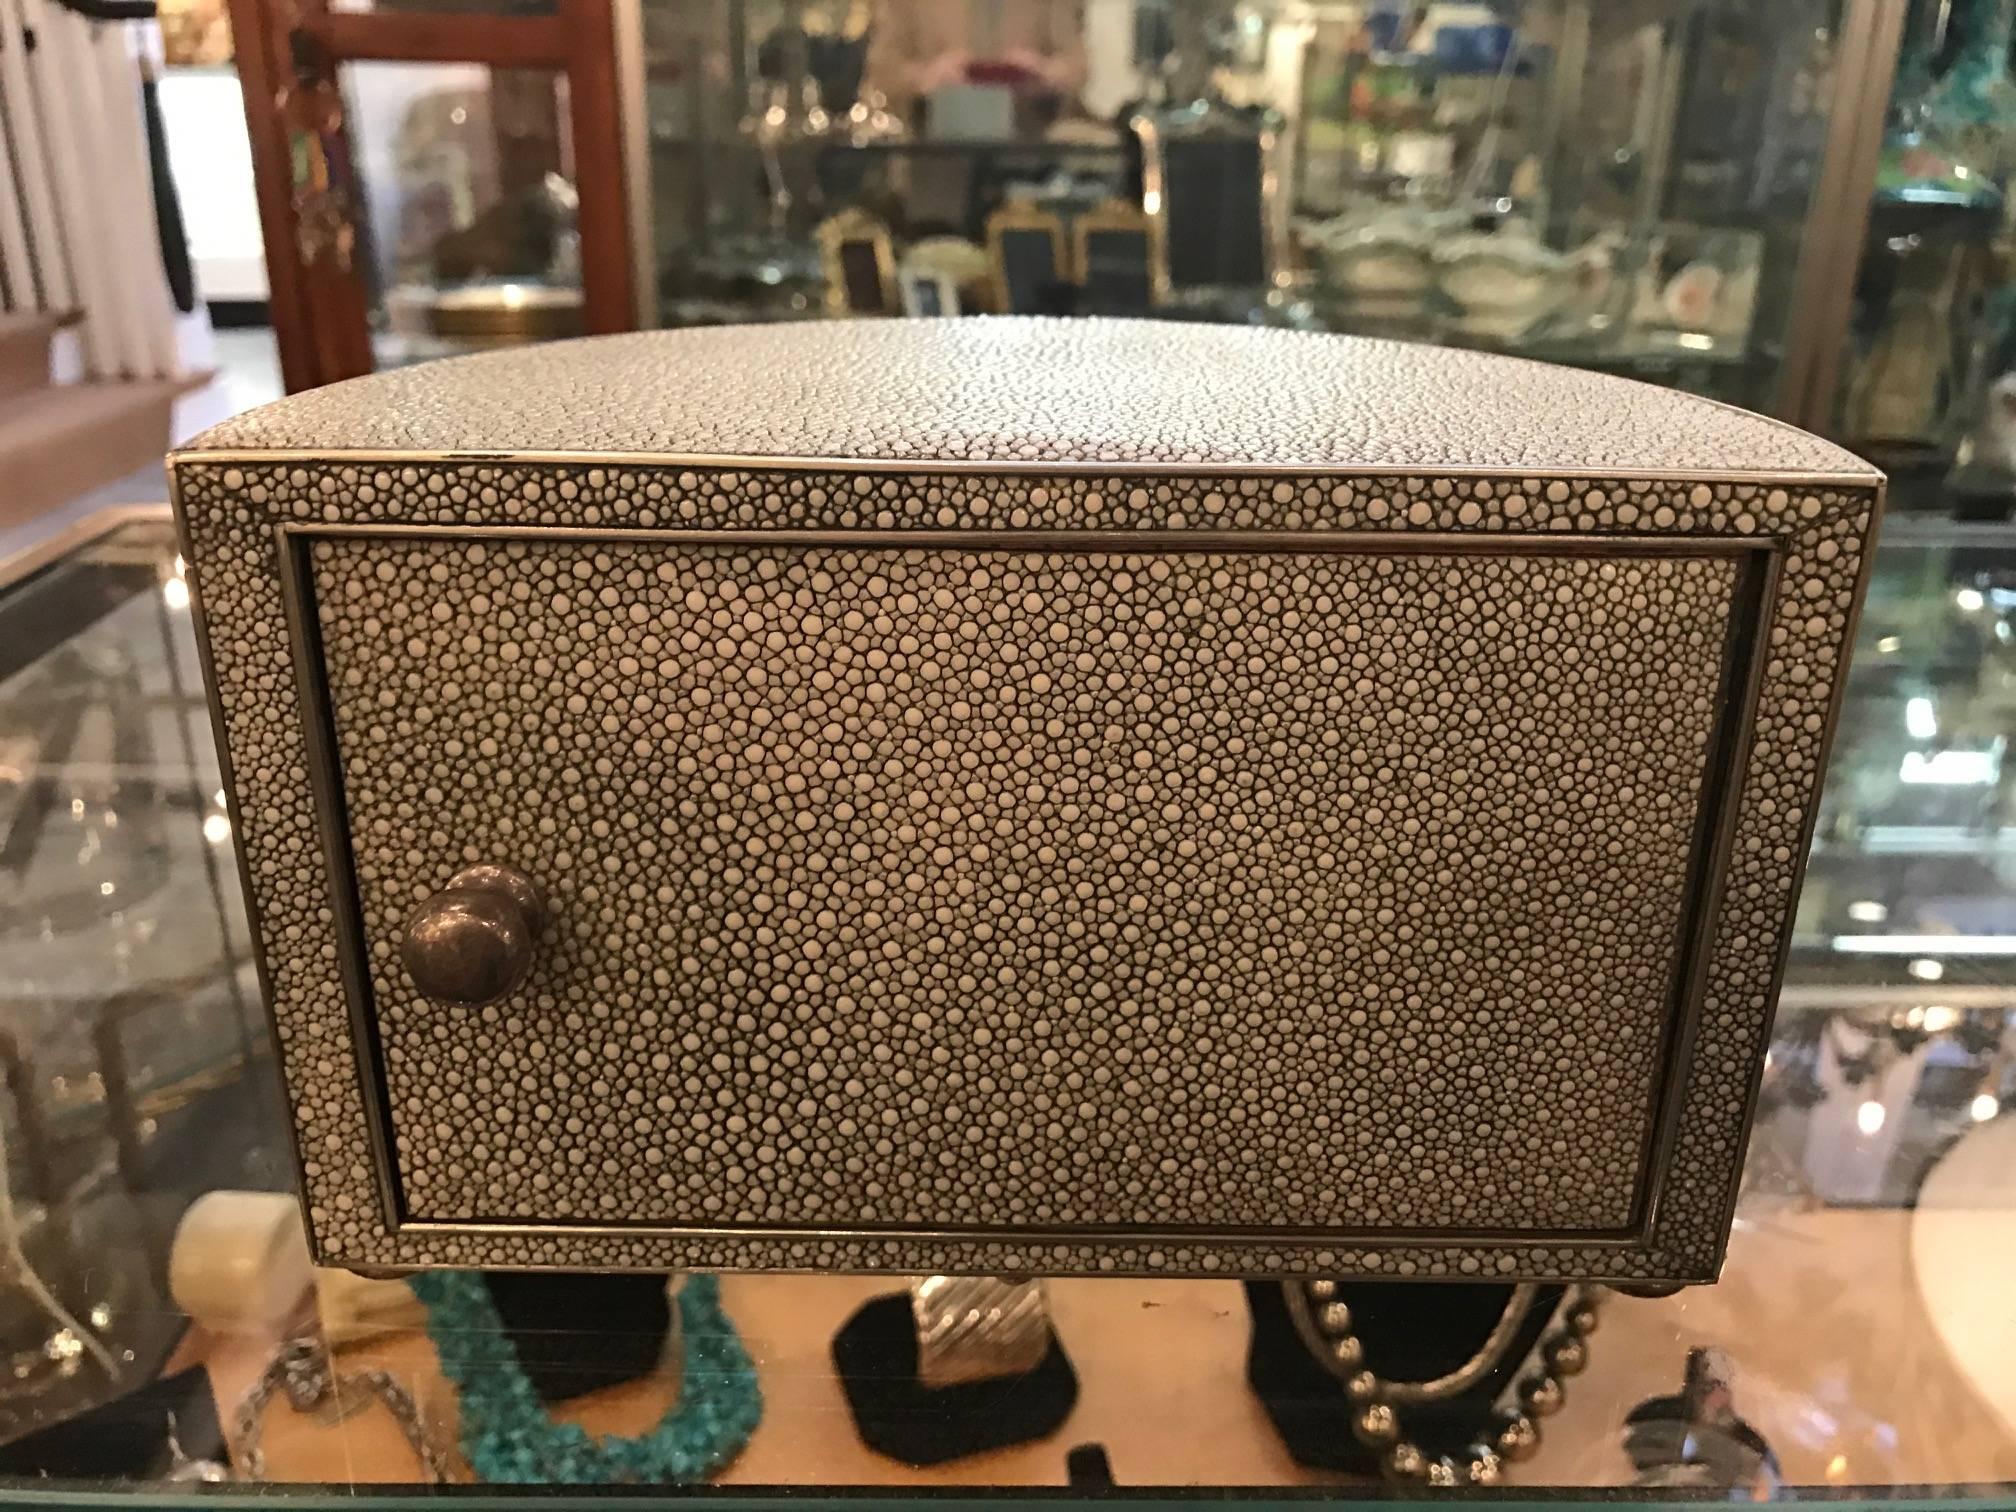 Luxurious shagreen revolving door desk top organizer made by Mark Cross London. Extravagance and luxury from the 1920s, this revolving door box with its main door that swings open to reveal separate compartments for small desk top organization. The